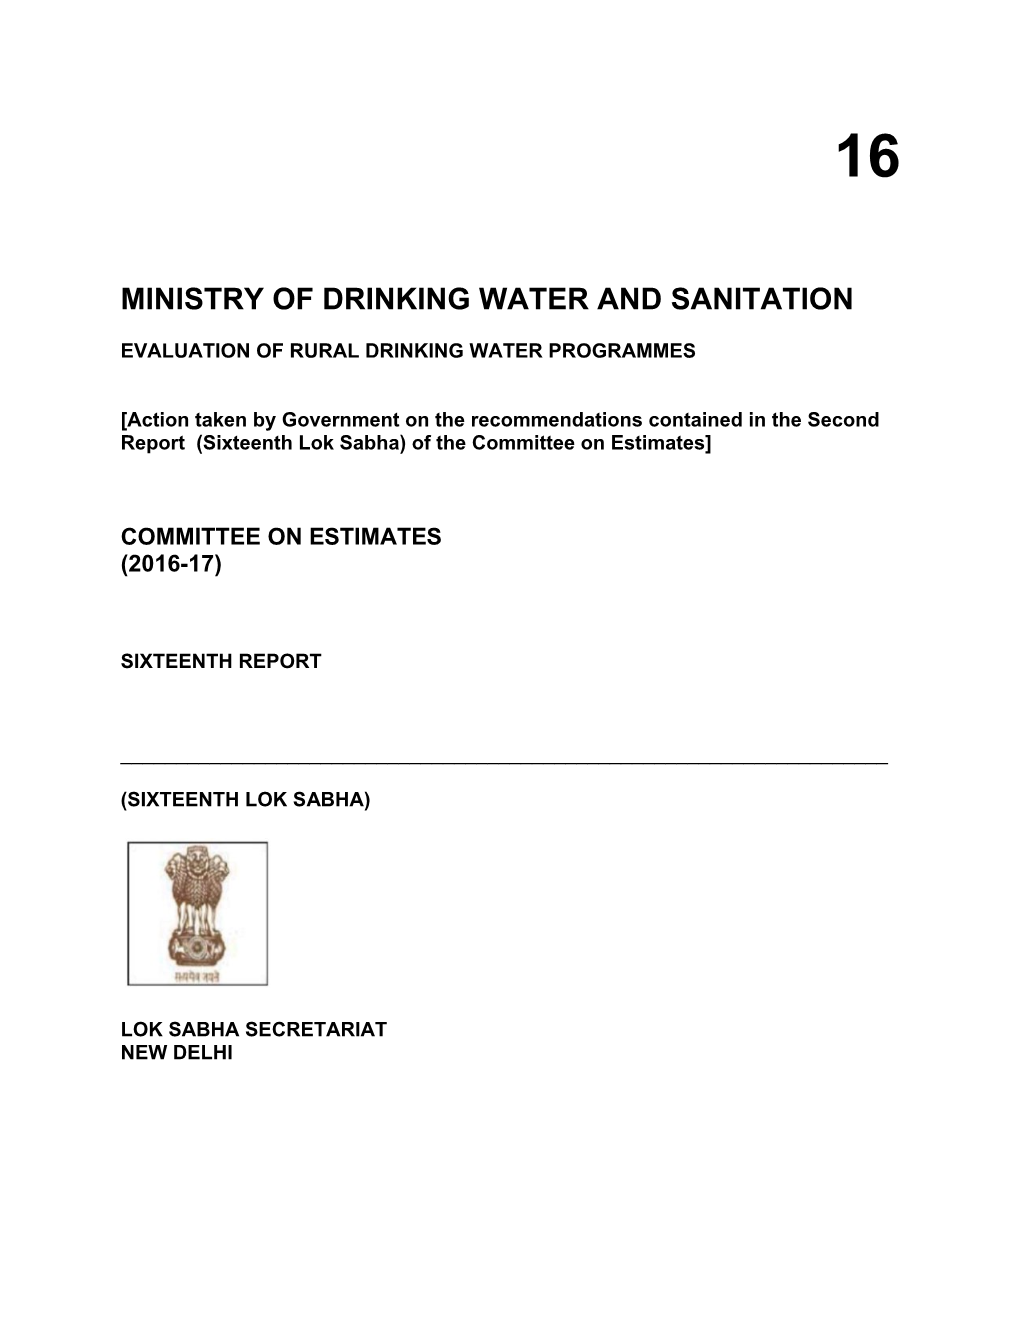 Ministry of Drinking Water and Sanitation